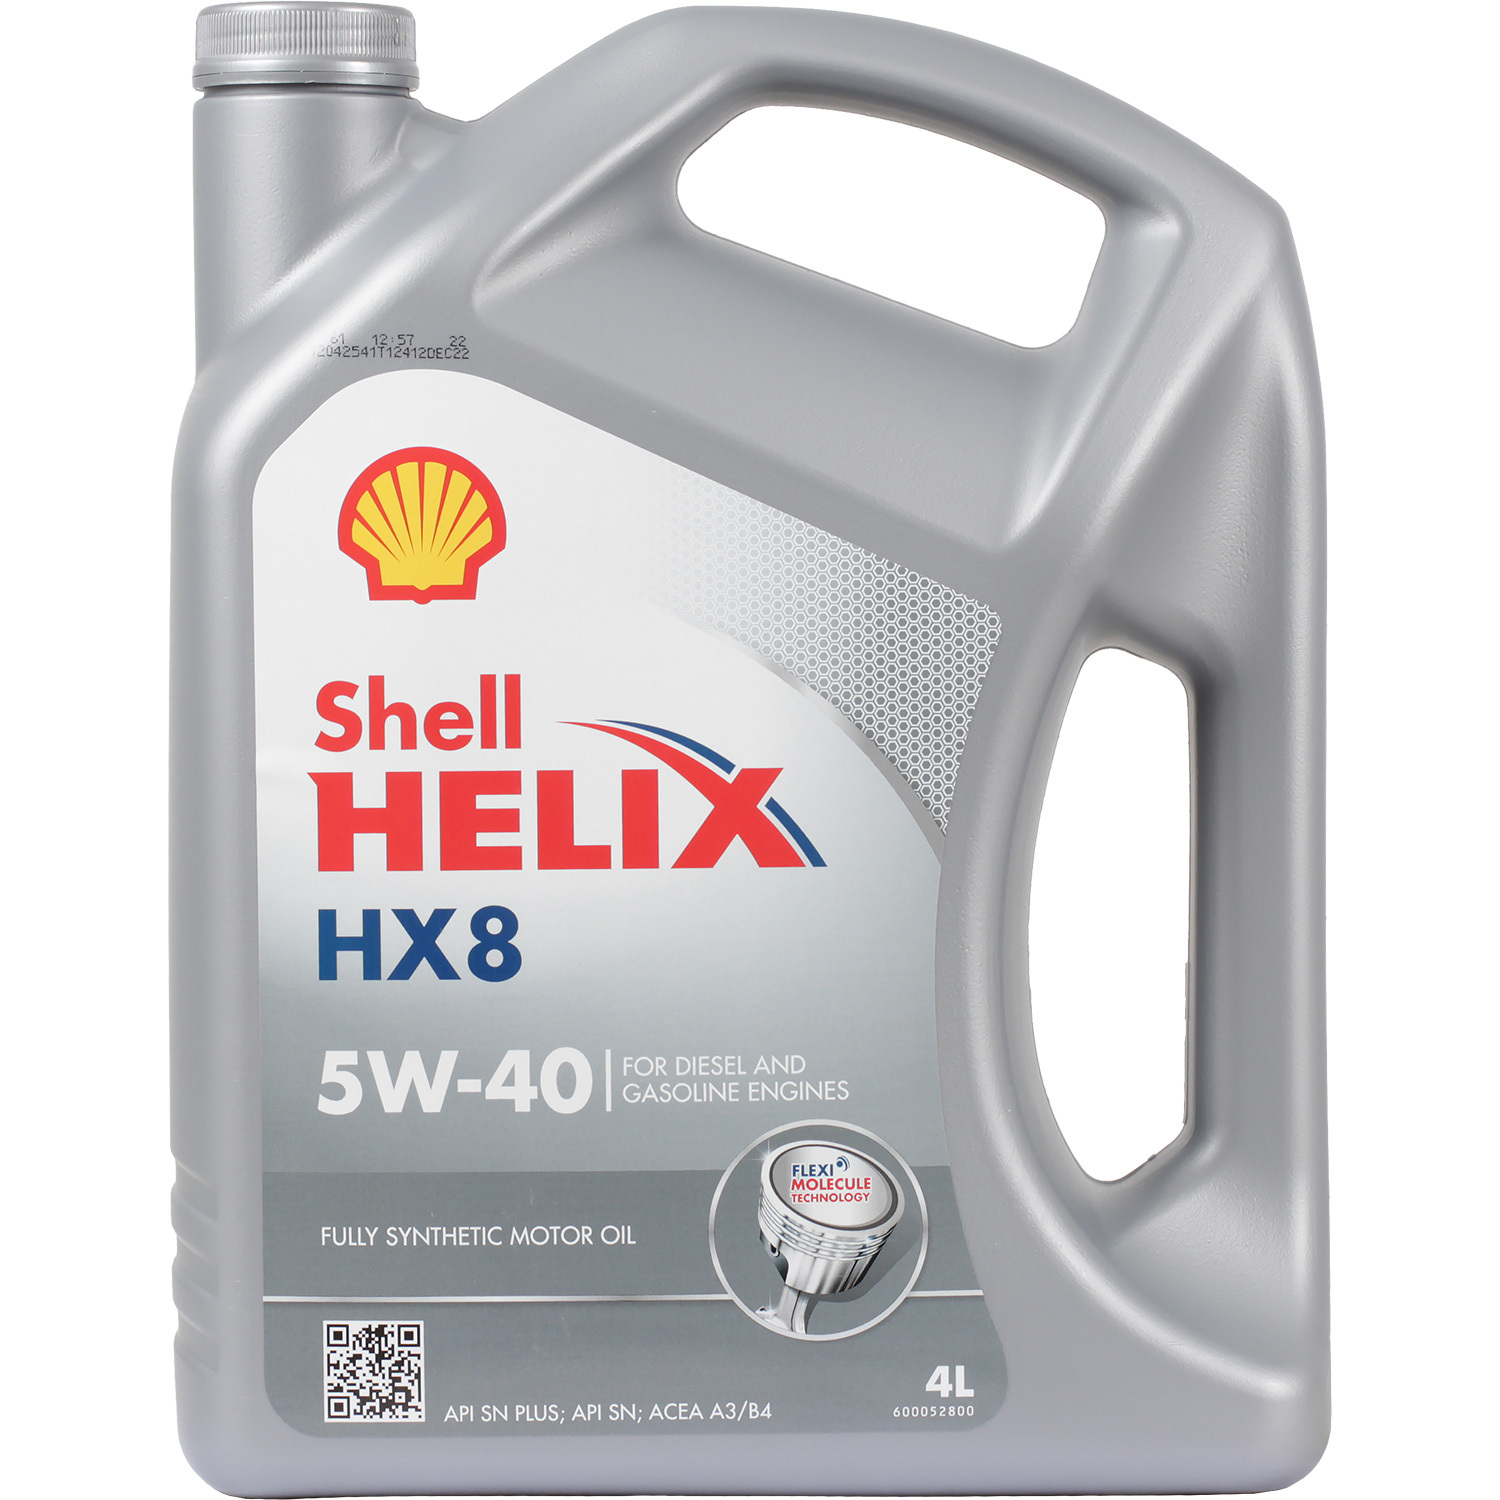 Shell Моторное масло Shell Helix HX8 5W-40, 4 л масло моторное shell helix ultra 5w 40 1 л